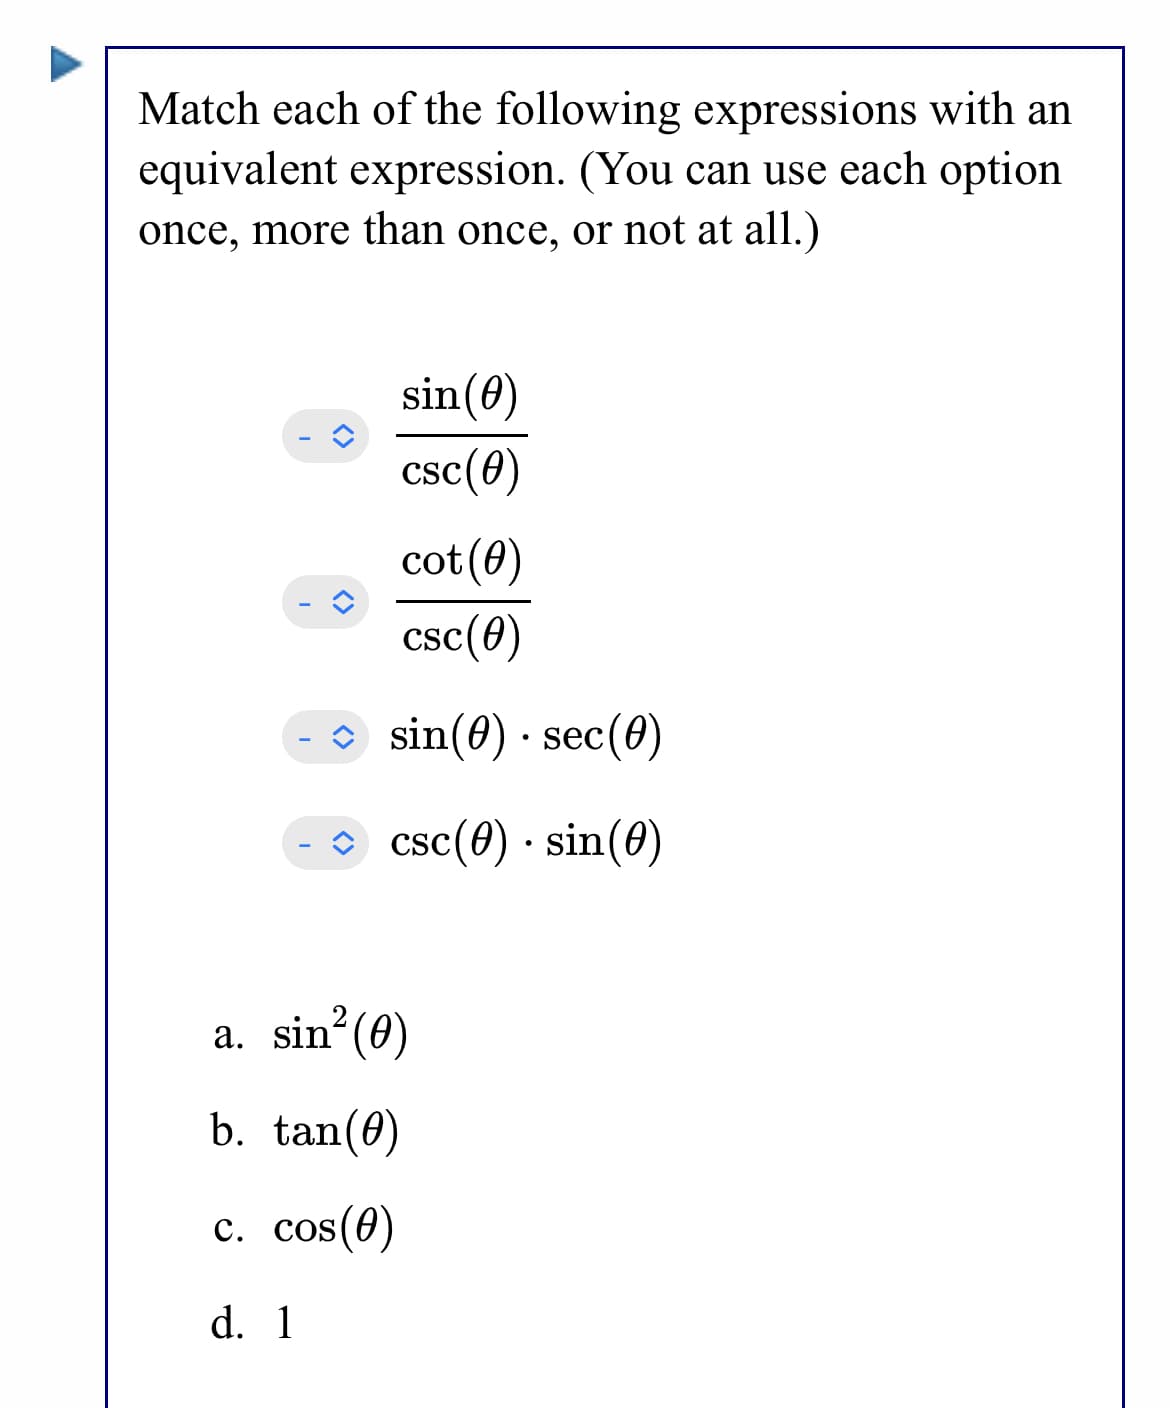 Match each of the following expressions with an
equivalent expression. (You can use each option
once, more than once, or not at all.)
sin(0)
csc(0)
cot(0)
csc(0)
O sin(0) · sec(0)
O csc(0) · sin(0)
a. sin (0)
b. tan(0)
c. cos(0)
d. 1
